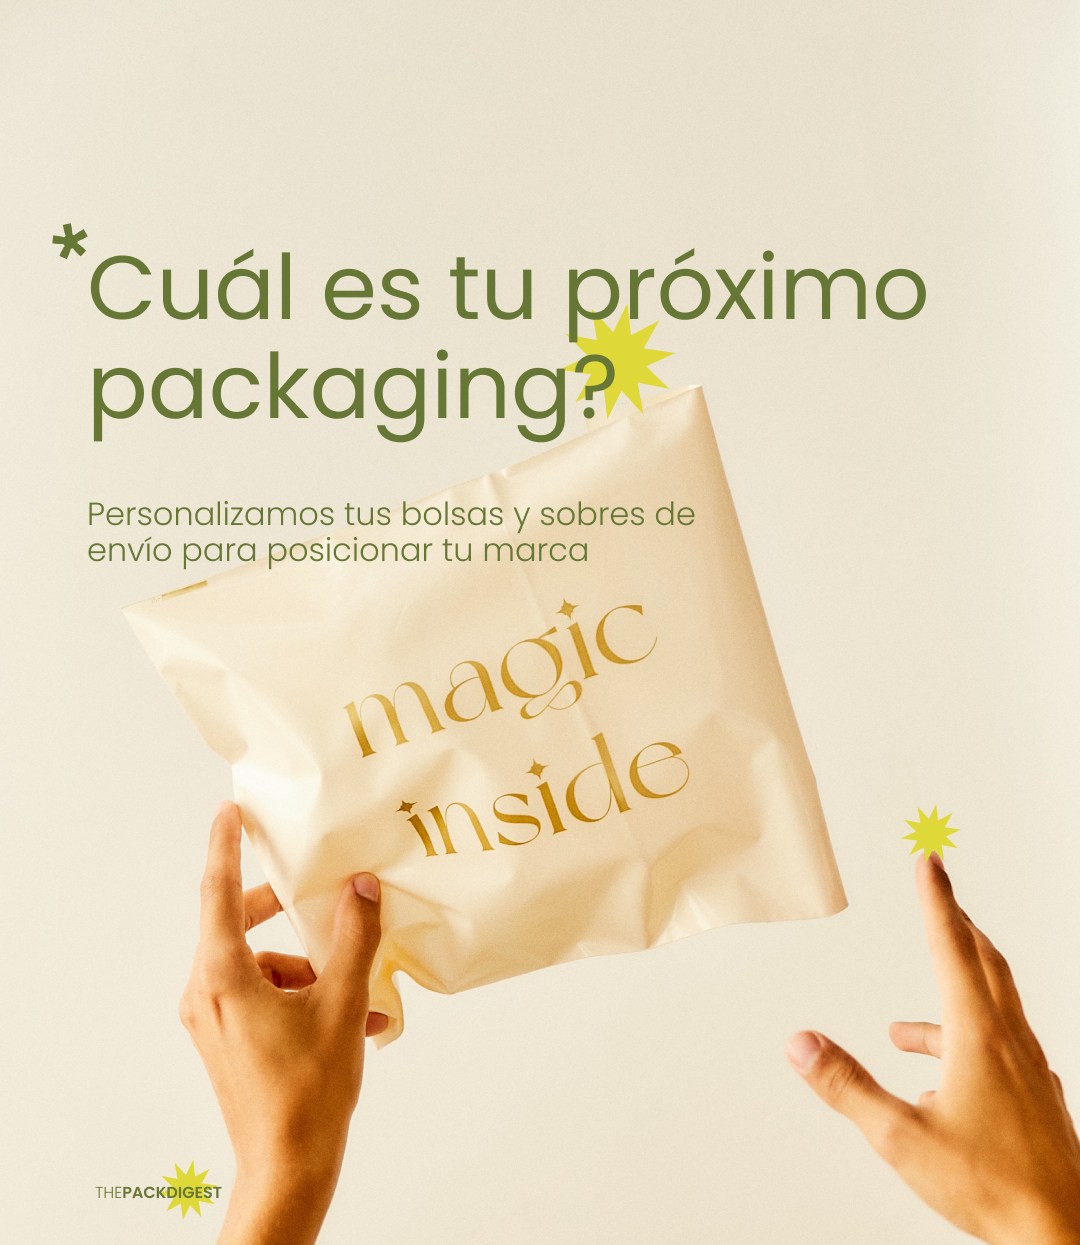 proximo packaging